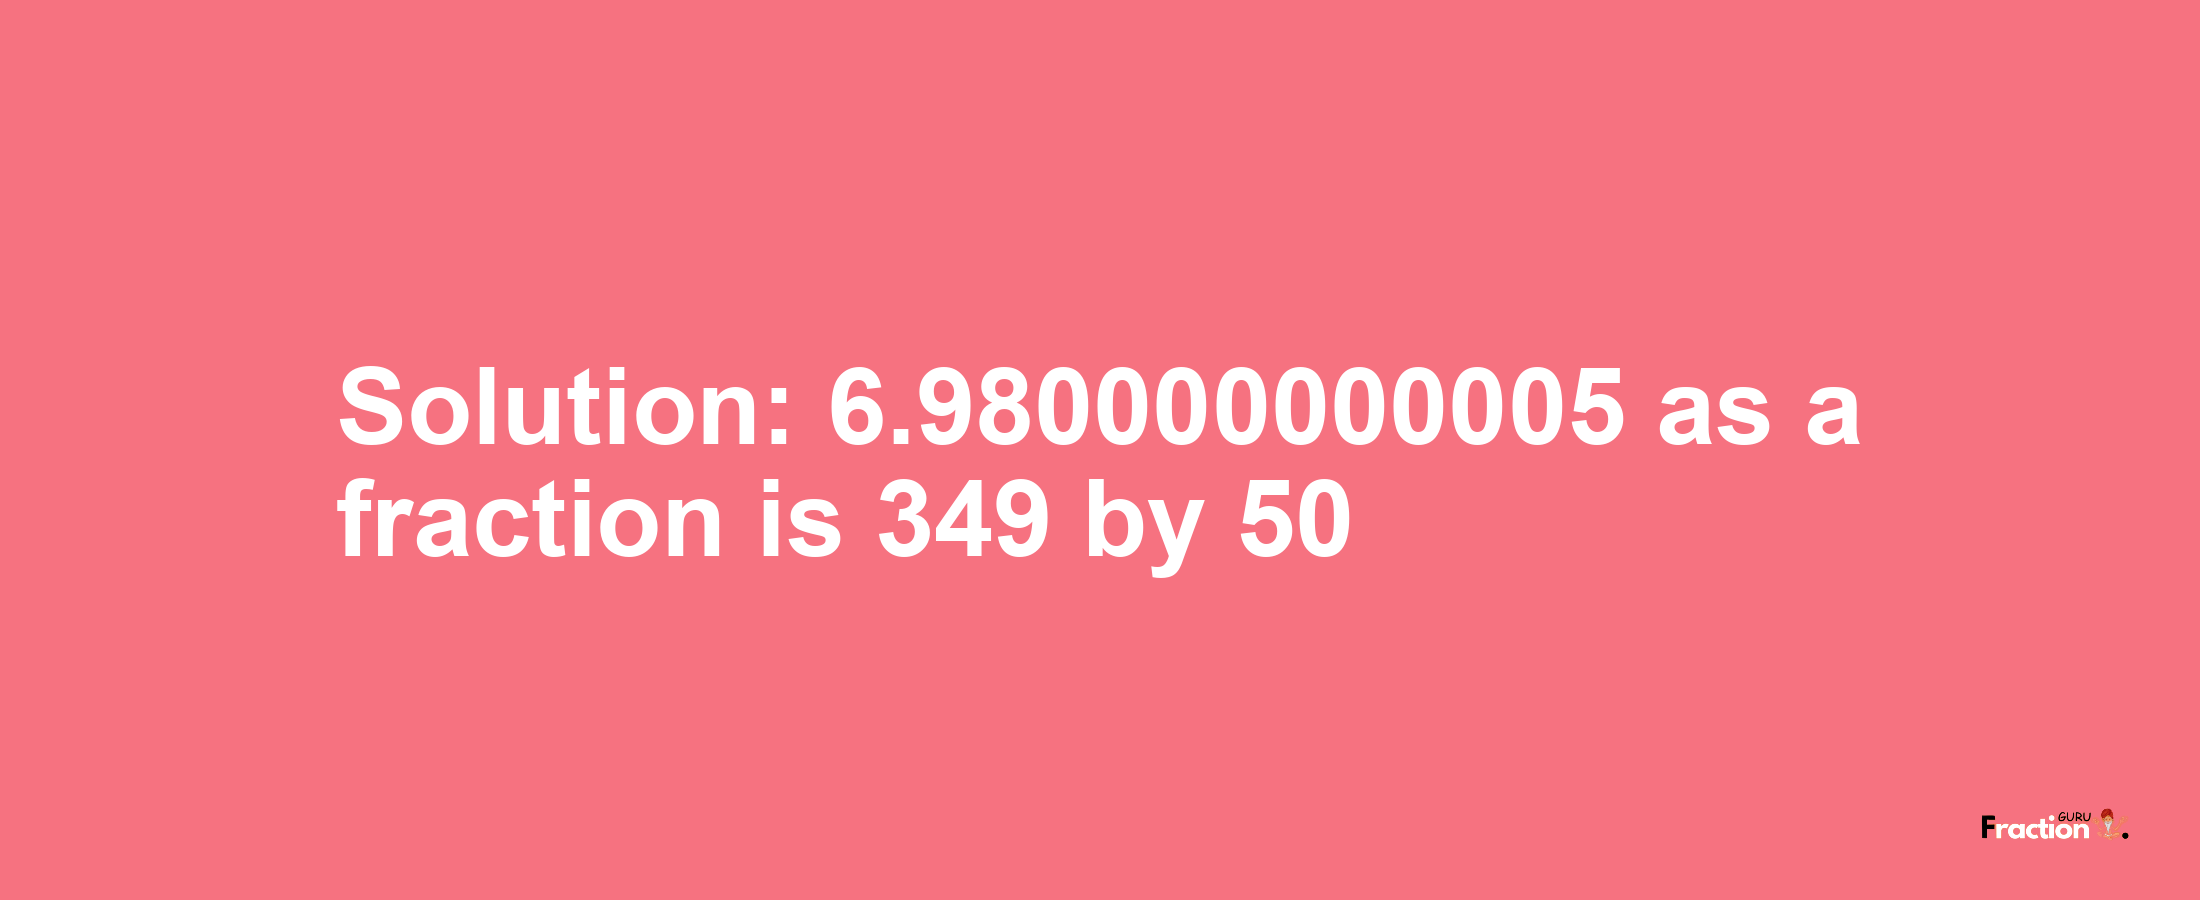 Solution:6.980000000005 as a fraction is 349/50